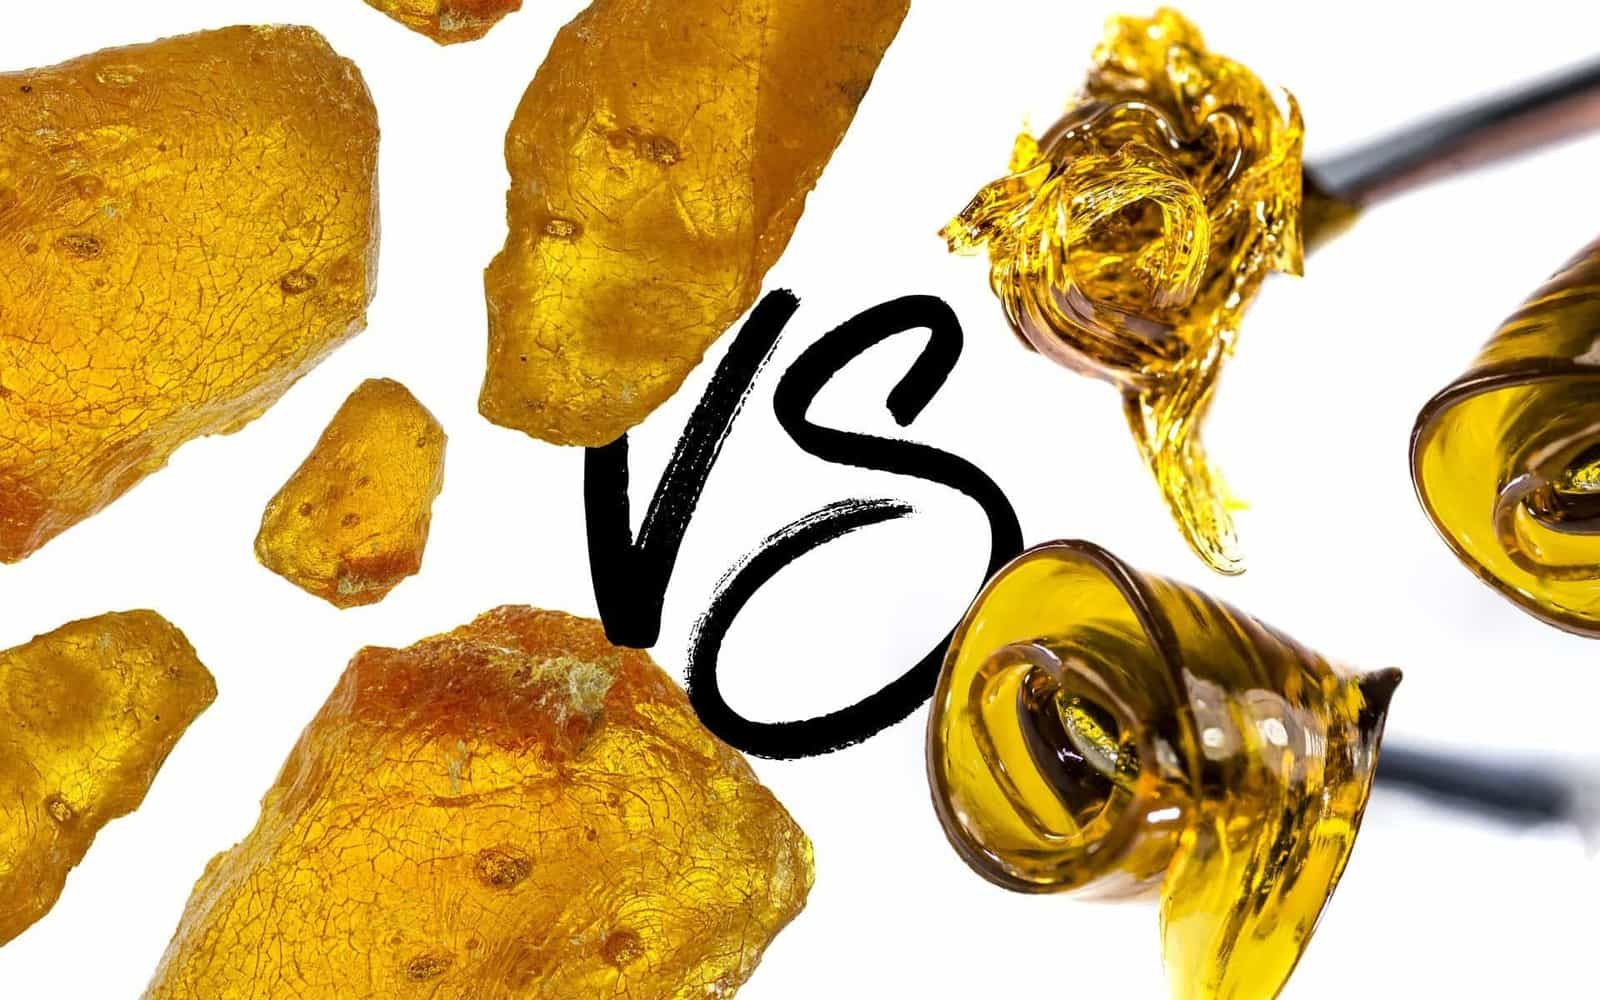 Rosin vs Live Rosin: What Are The Differences?